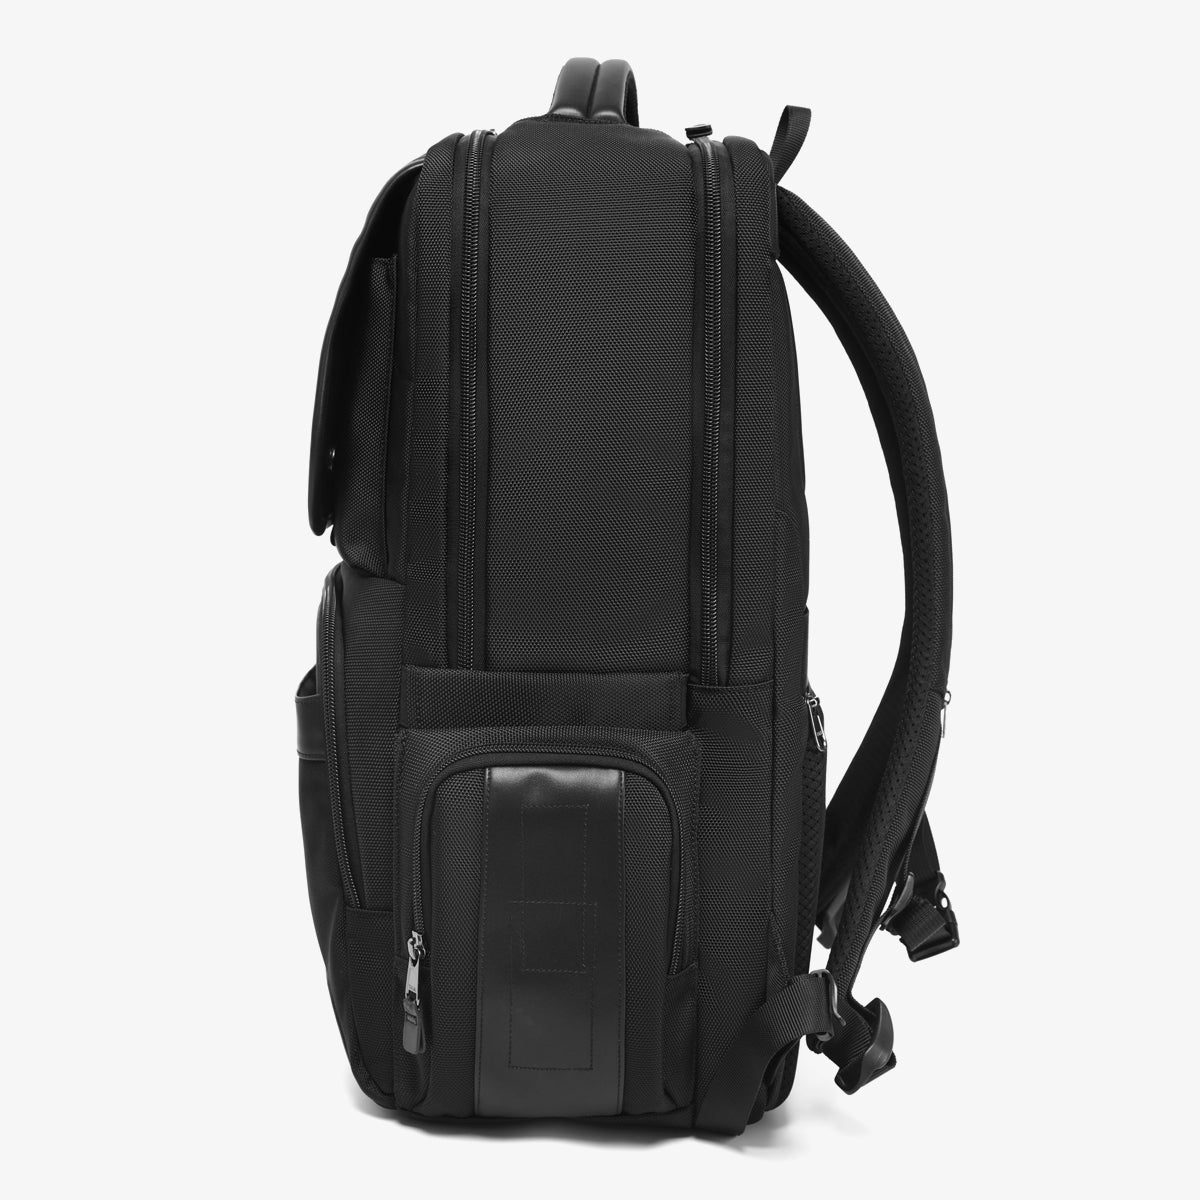 Tigernu T-B3916 Anti-Theft 17 inch Laptop Backpack Bag with FREE Lock